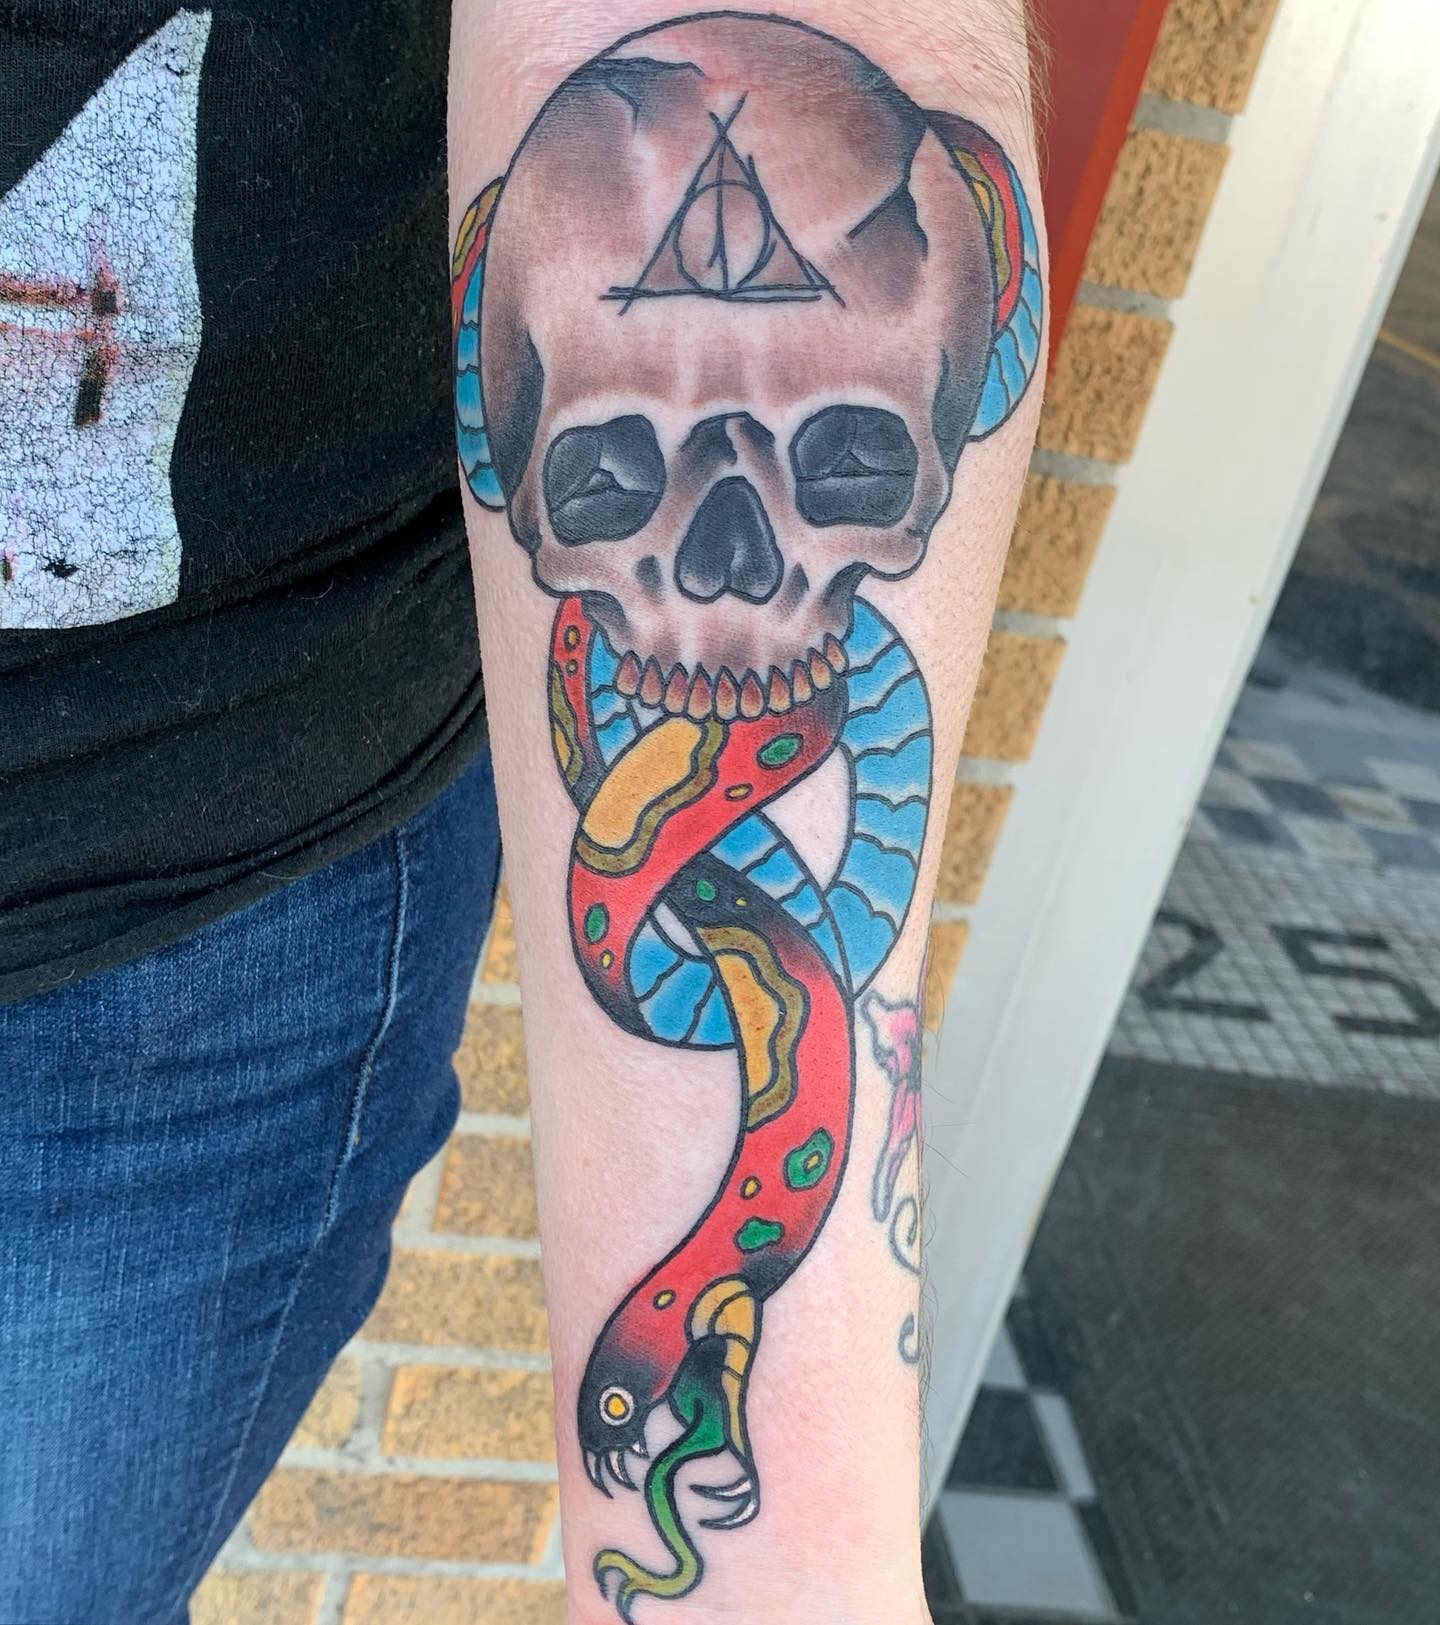 It looks like the tattoo artist has done an amazing job of turning the death eater into a colorful, friendly thing. Blue, red, yellow and green colors make this death eater shine out.